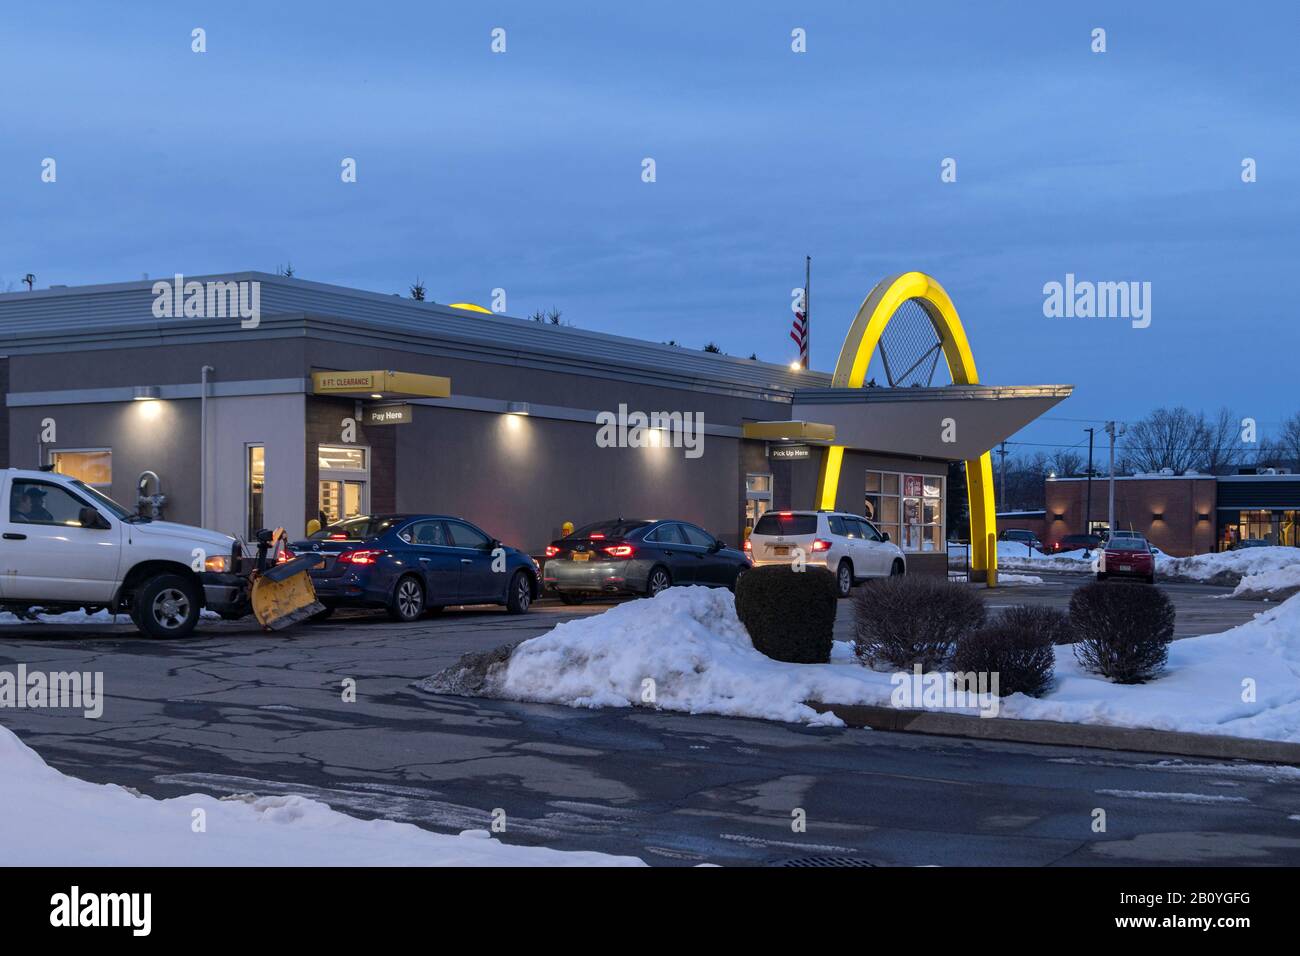 Utica, NY - Feb 12, 2020: Evening View of McDonald's Pickup Window with Cars Line Waiting for Orders. Stock Photo